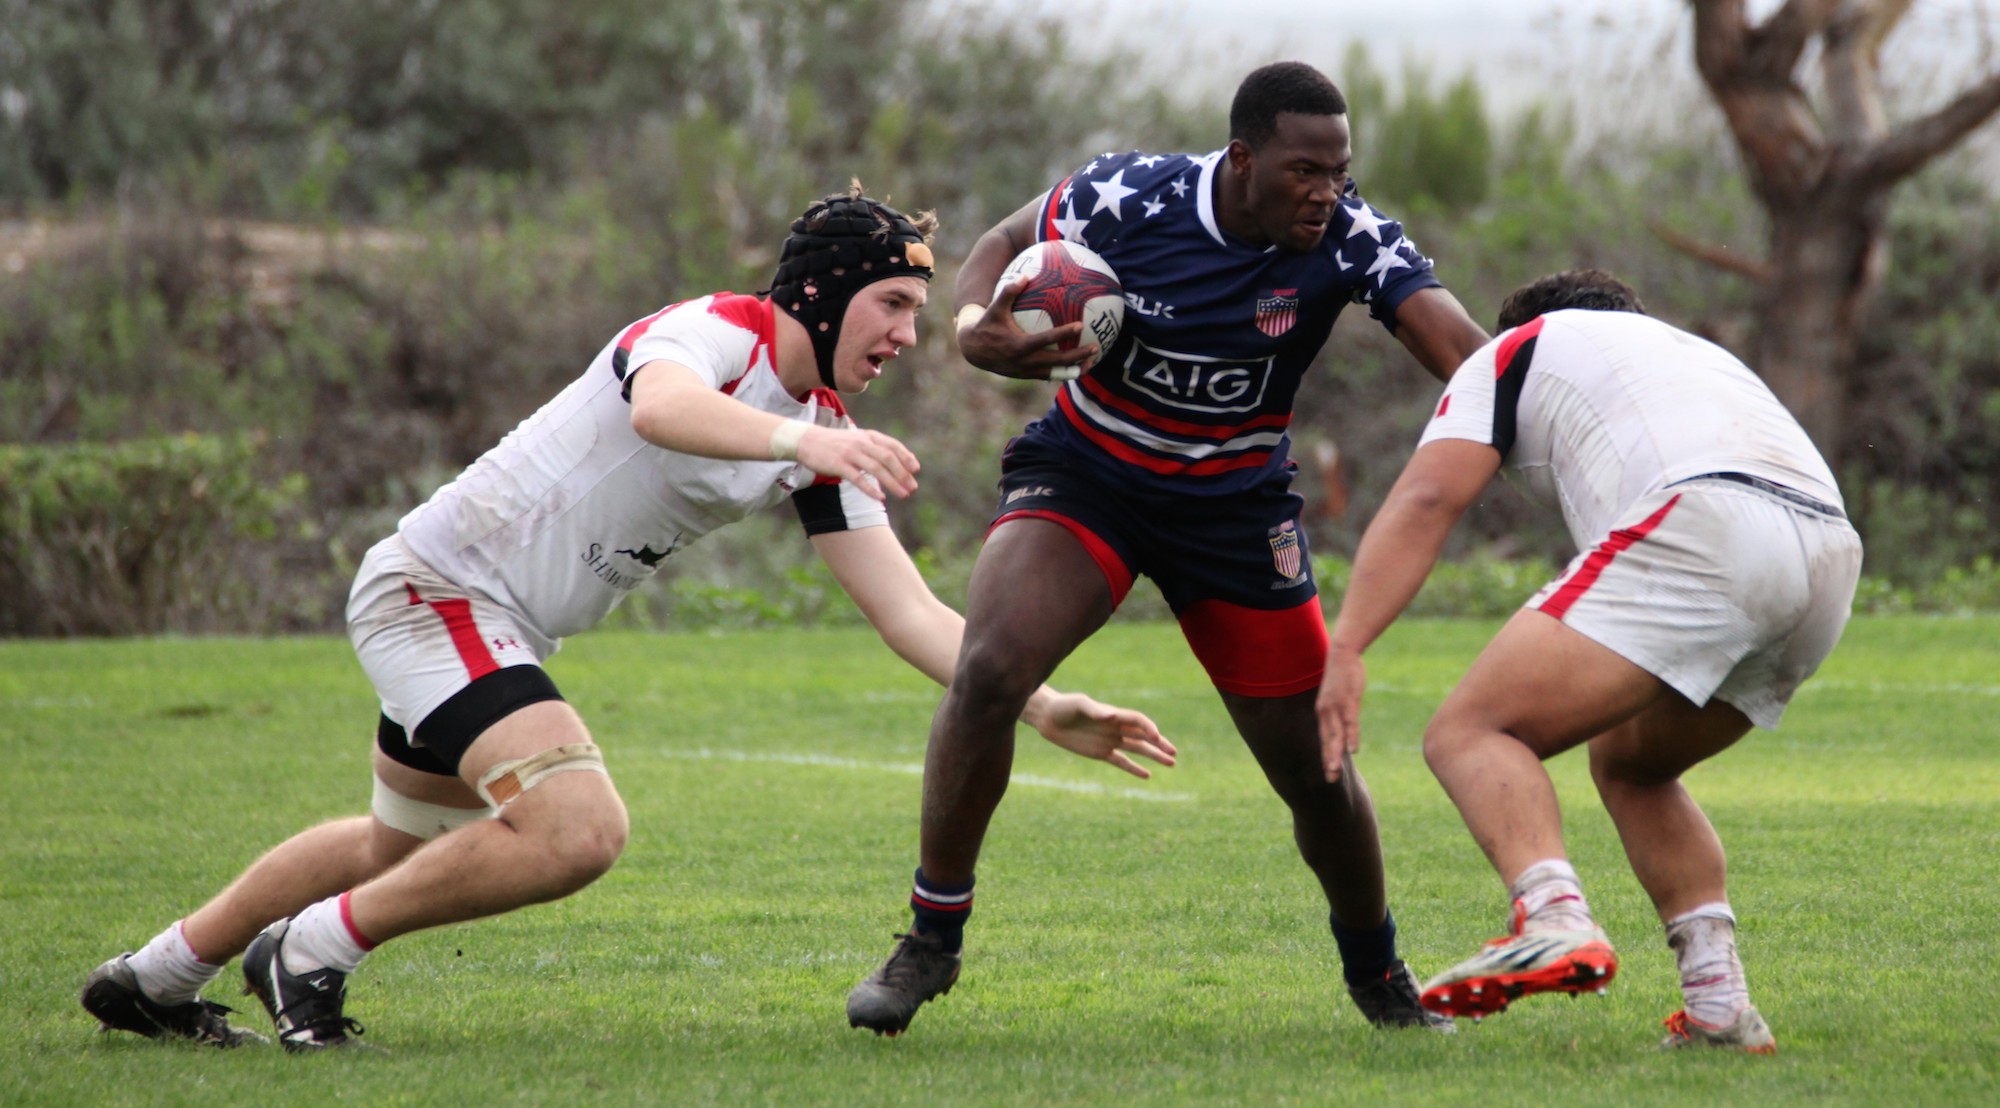 Calvin Gentry for the USA U19s rugby team in 2017. Ed Petersen photo.